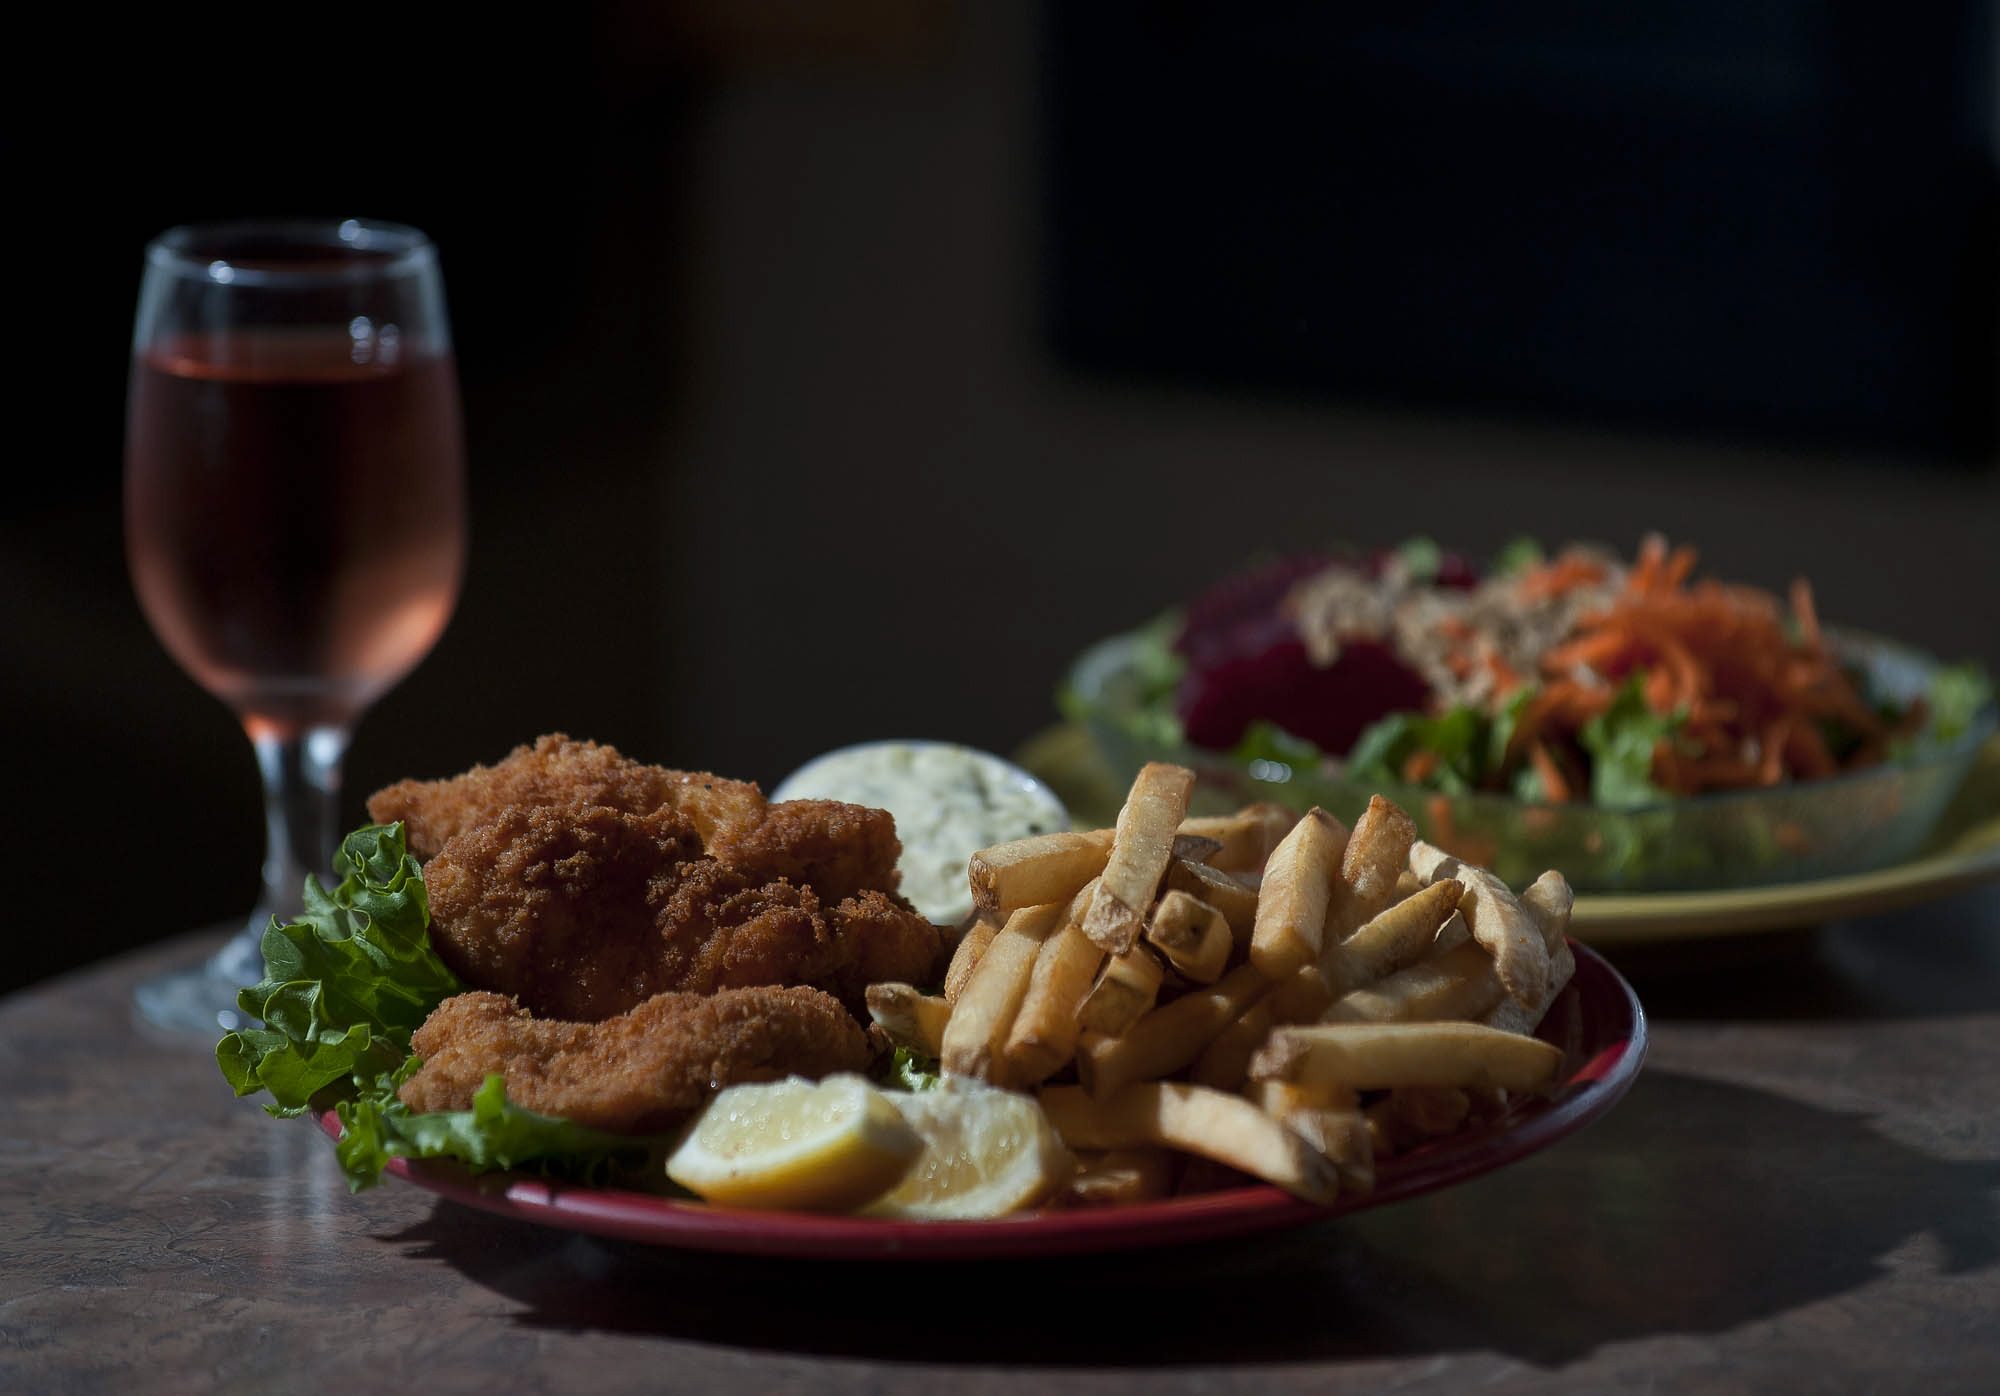 Fish and chips and a green salad are offered at Julie's Cottage Kitchen on Northeast 72nd Avenue.